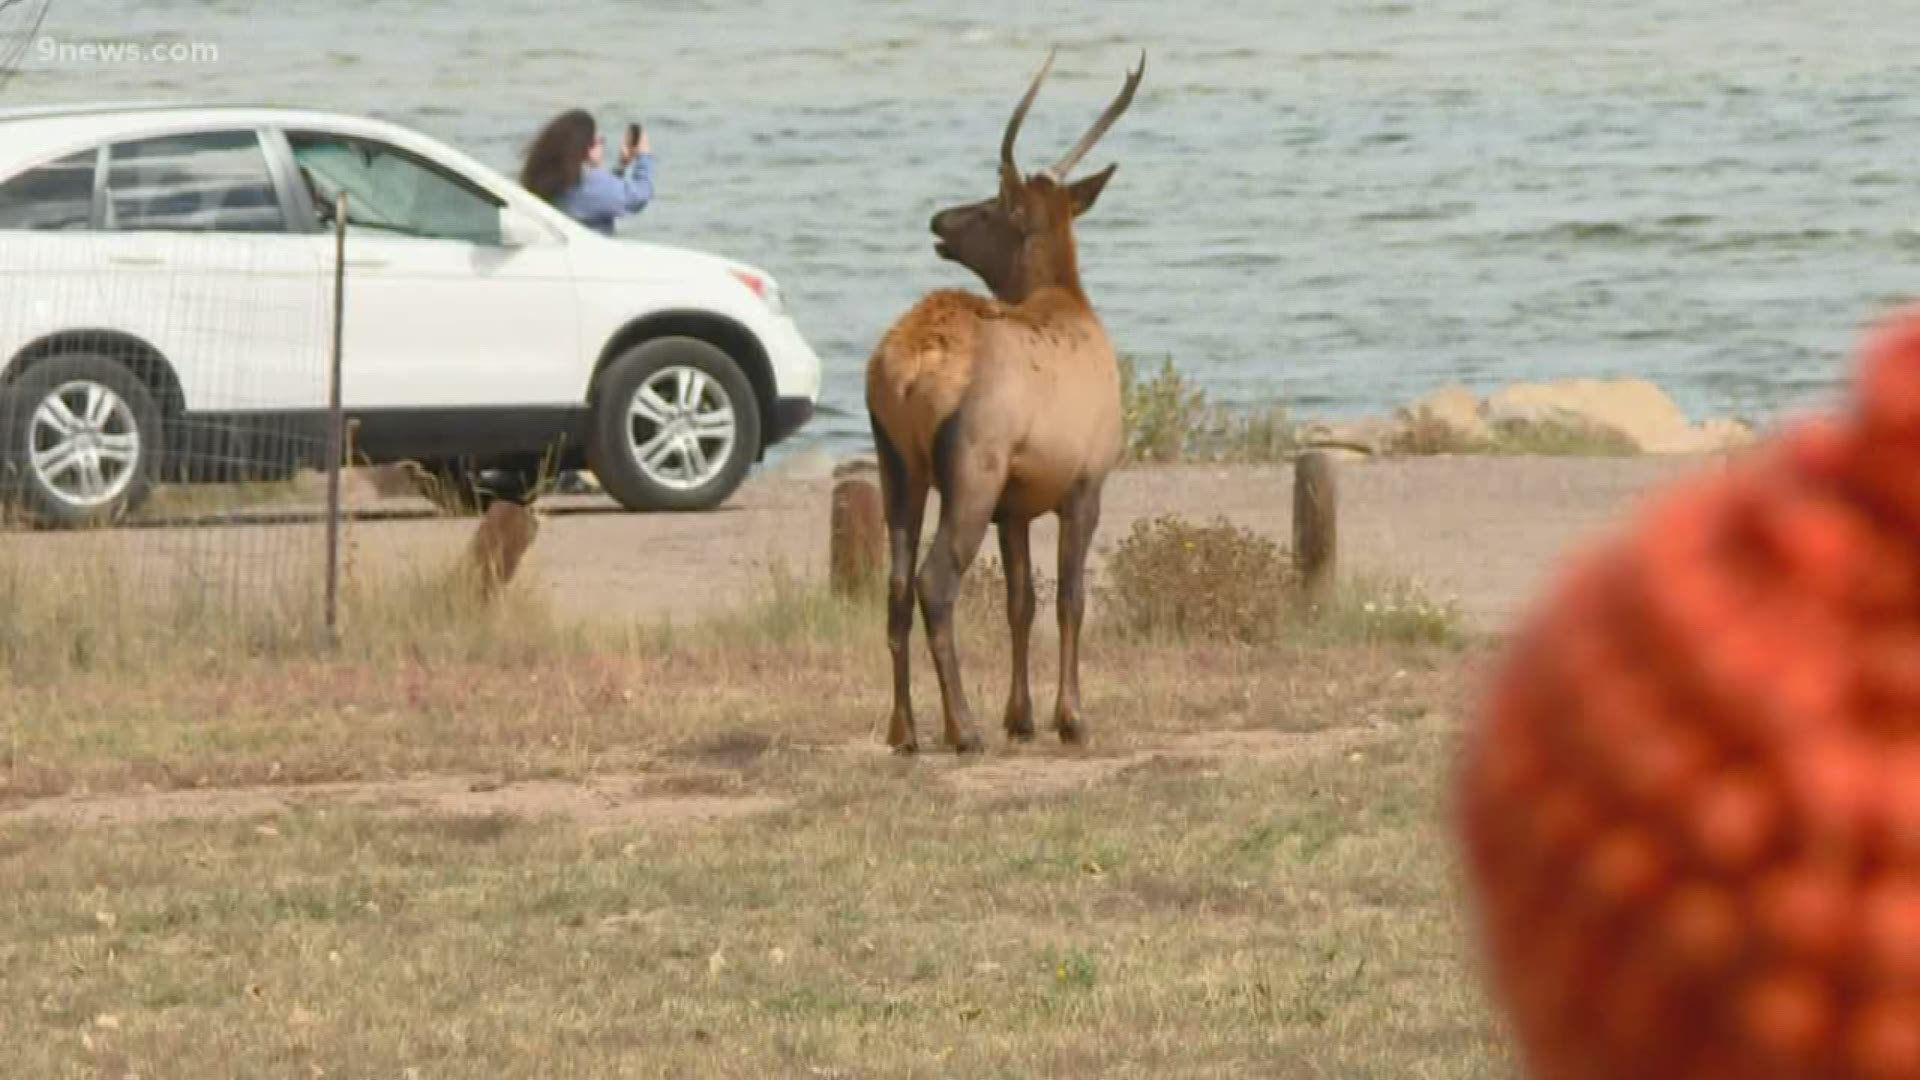 A man was brought to the hospital after he fell following a close encounter with a bull elk in Estes Park Thursday morning.